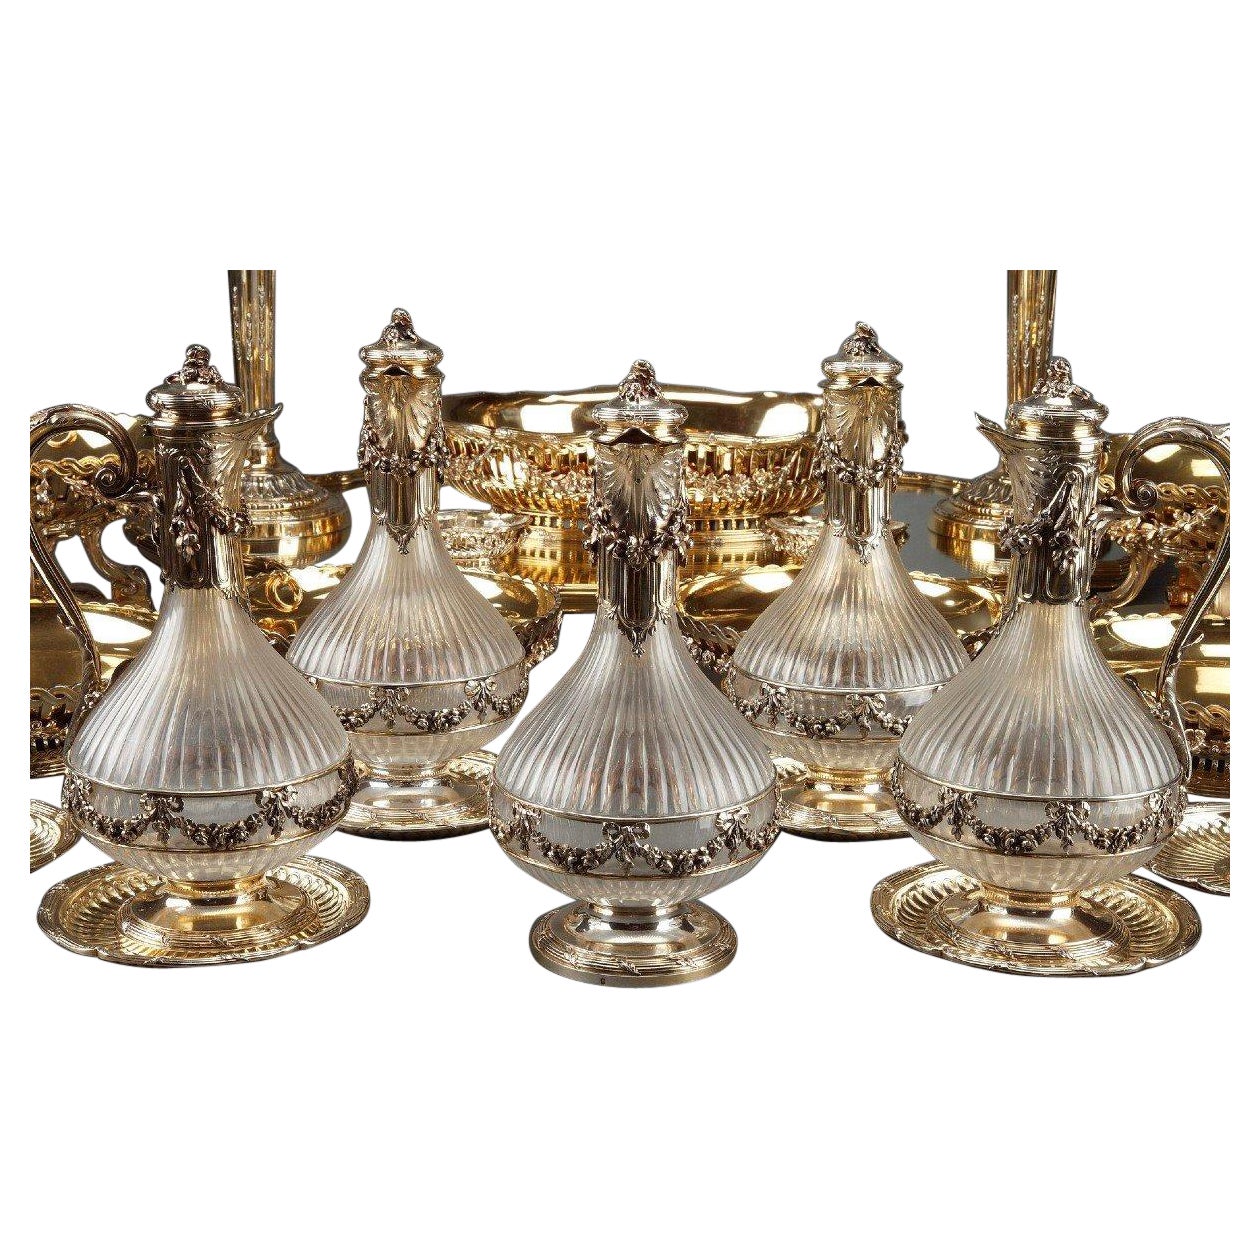 Goldsmith Boin Taburet - Set Of 19 Parts Decoration Of Table In Vermeil For Sale